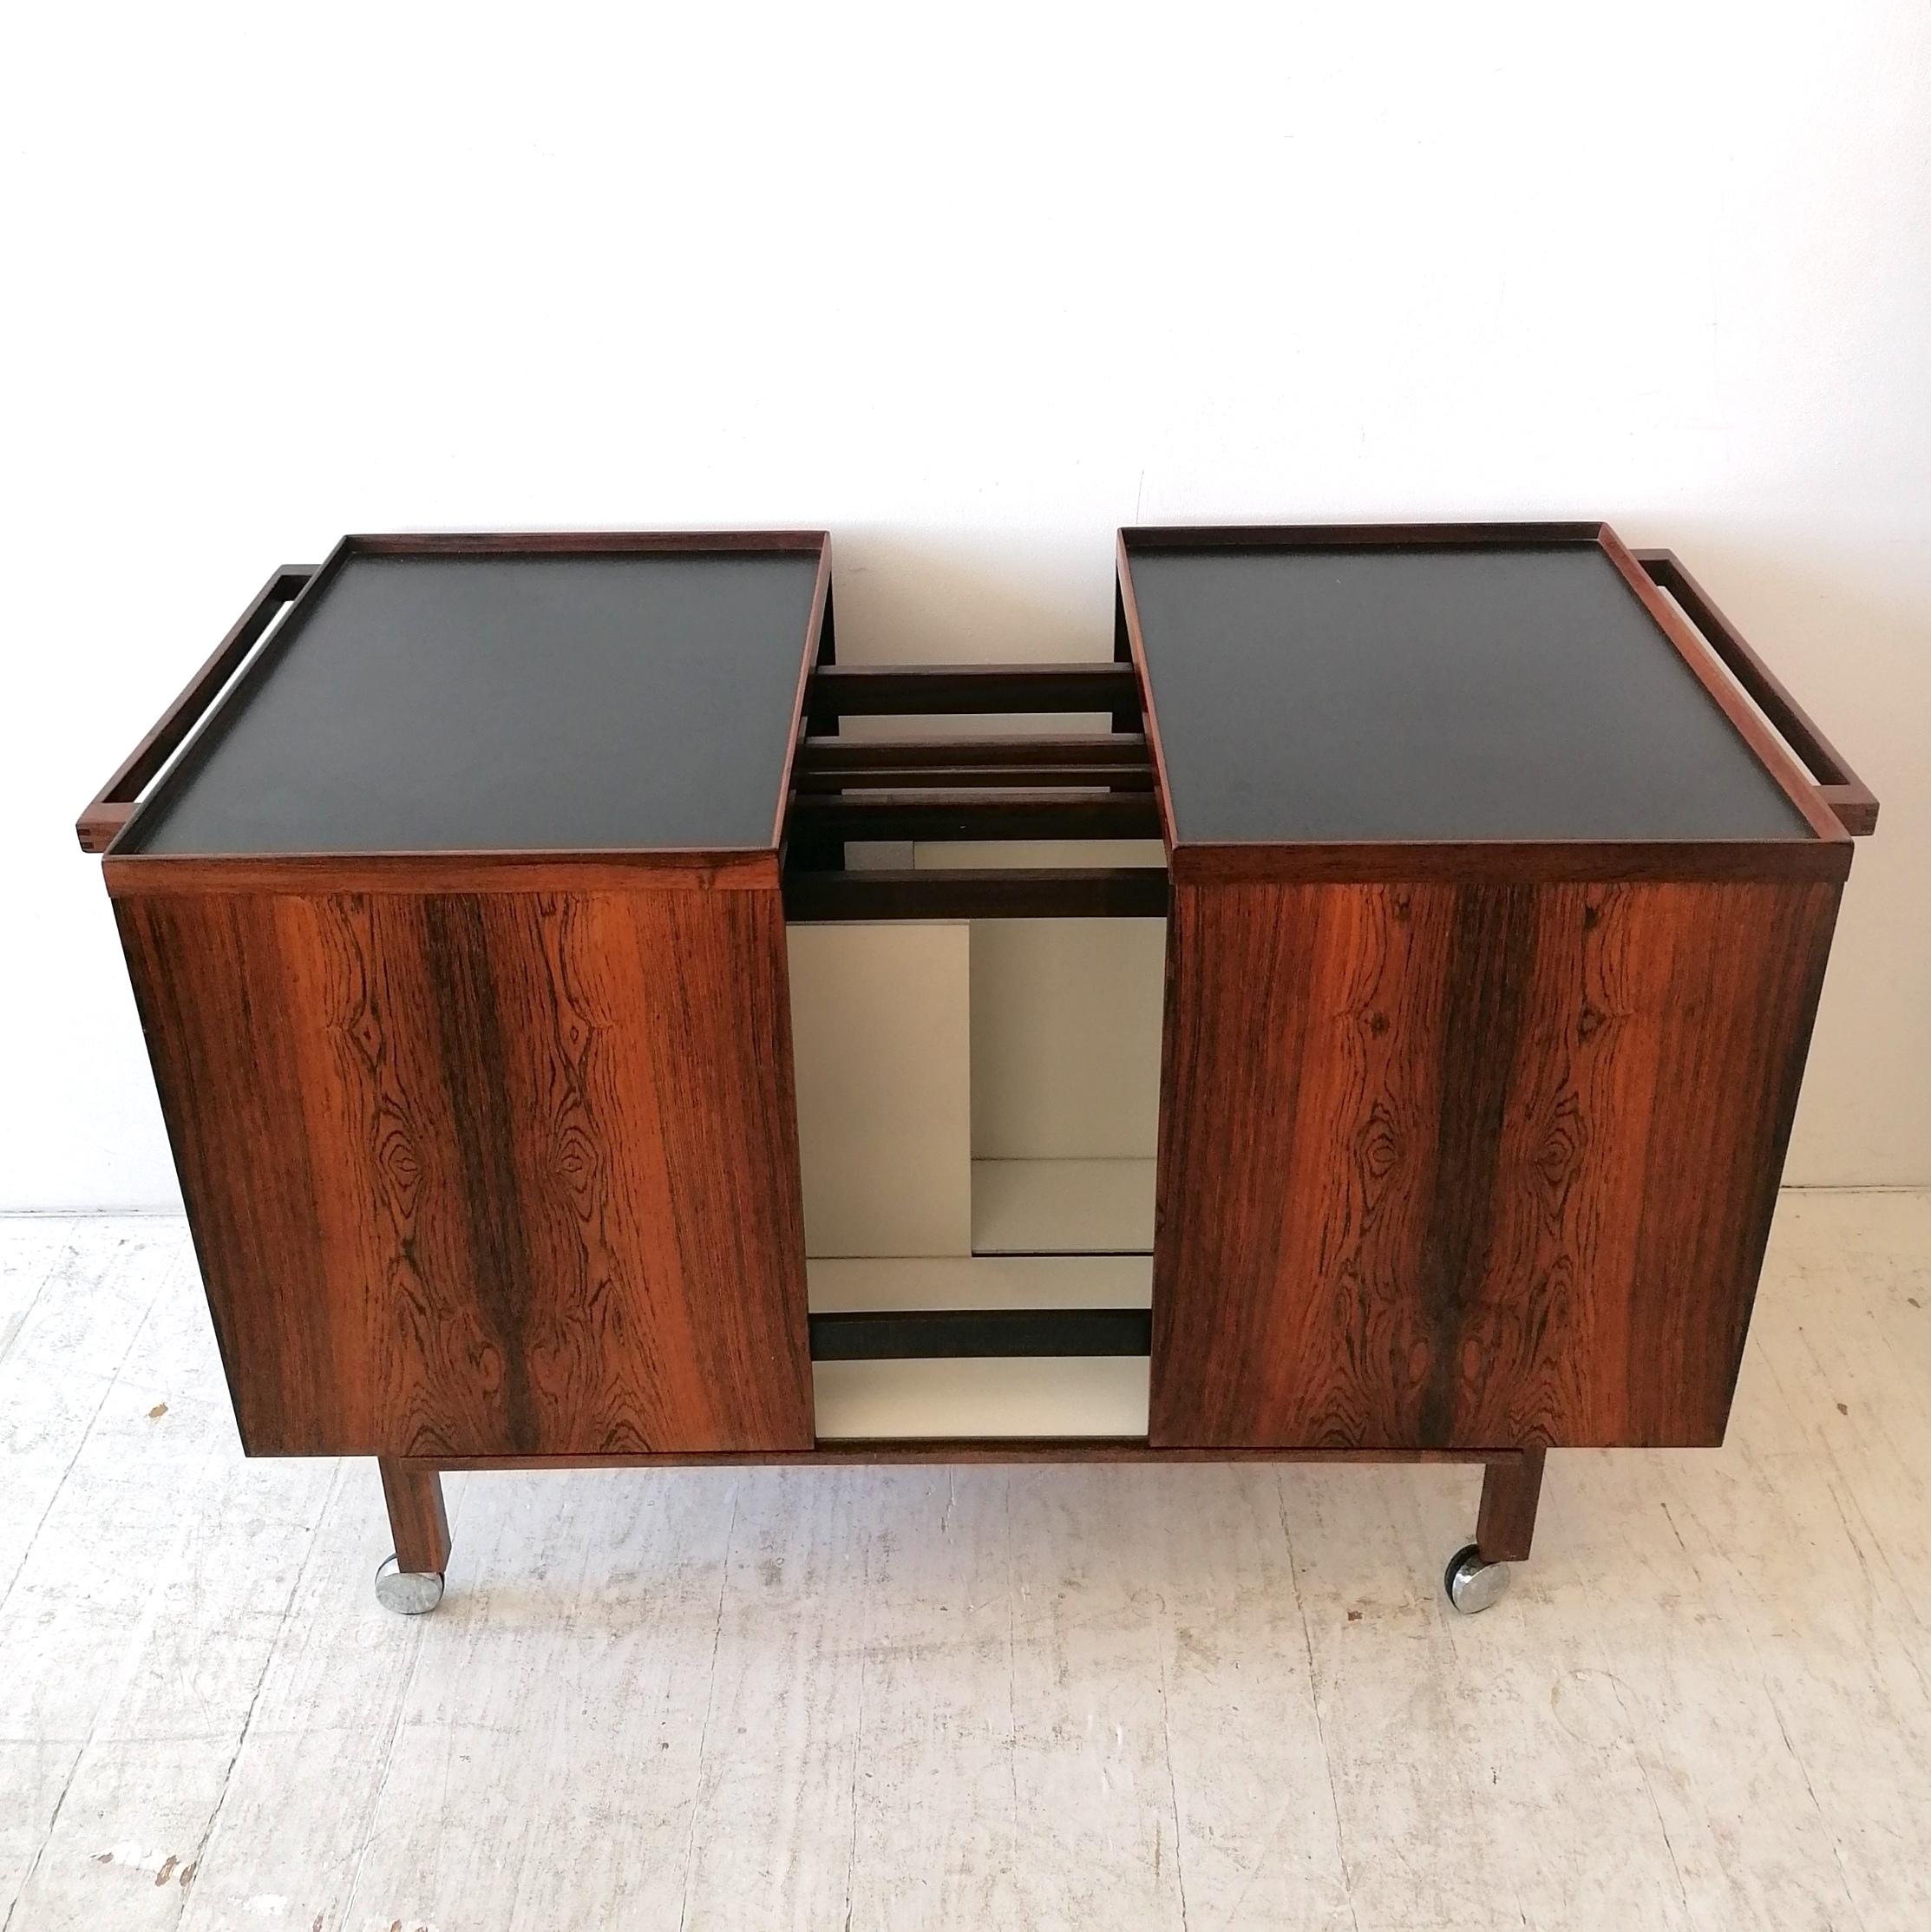 Mid century rosewood expanding drinks trolley / bar cart by Niels-Erik Glasdam Jensen for Vantinge Mobelindustri, Denmark 1960s. Divided inset black laminate top. Inside are sliding white compartments and a glass shelf.
Overall great condition-